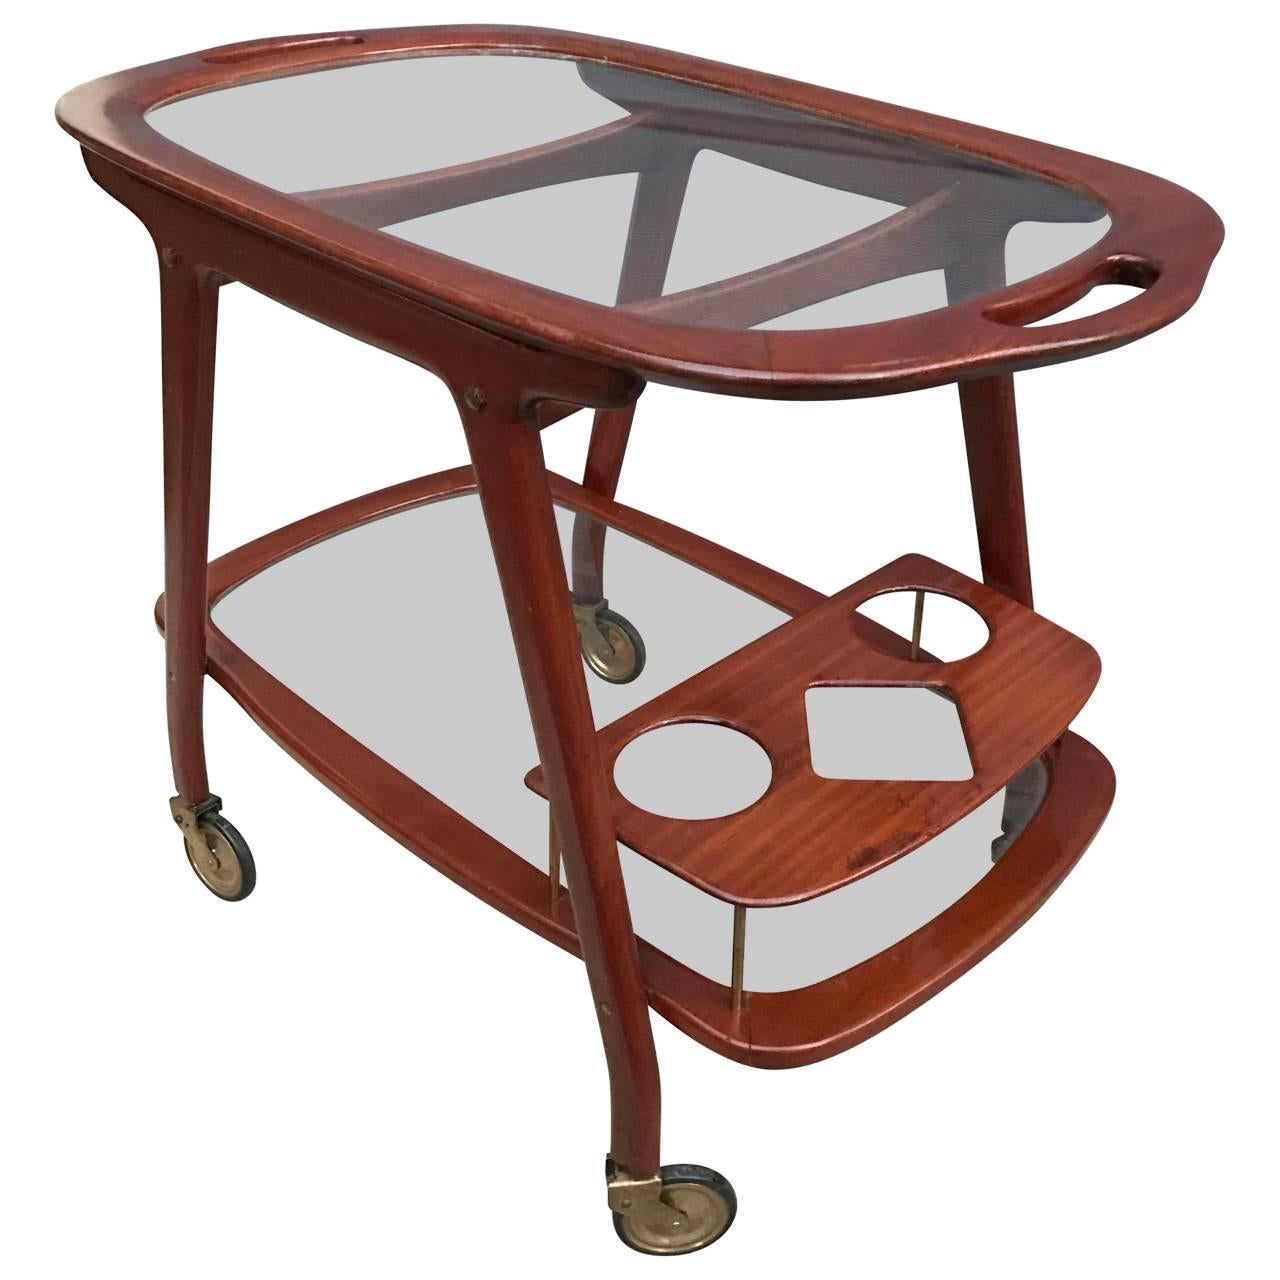 Italian two-part bar trolley. Top glass part comes off and serves as a tray.